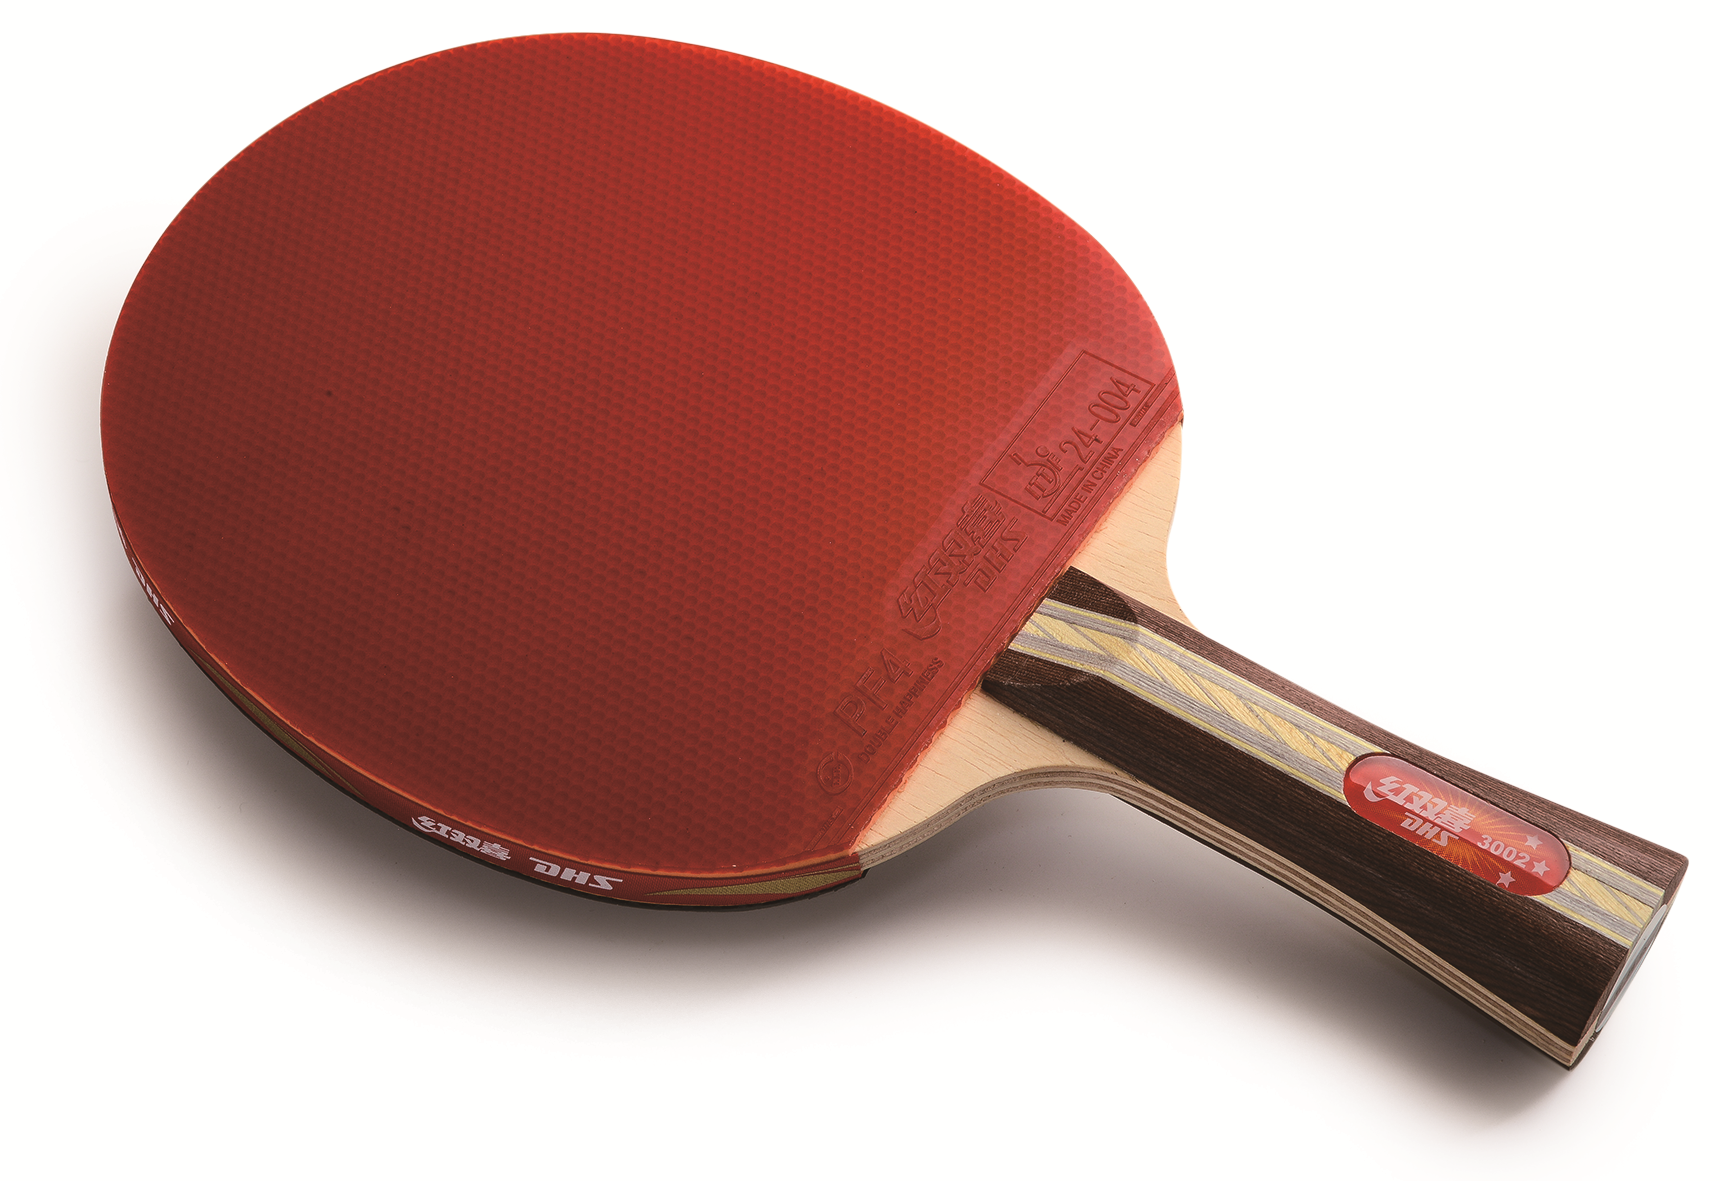 Authentic Pure Wood Blade DHS Racket 3002 FL Table Tennis & Ping Pong Racket 